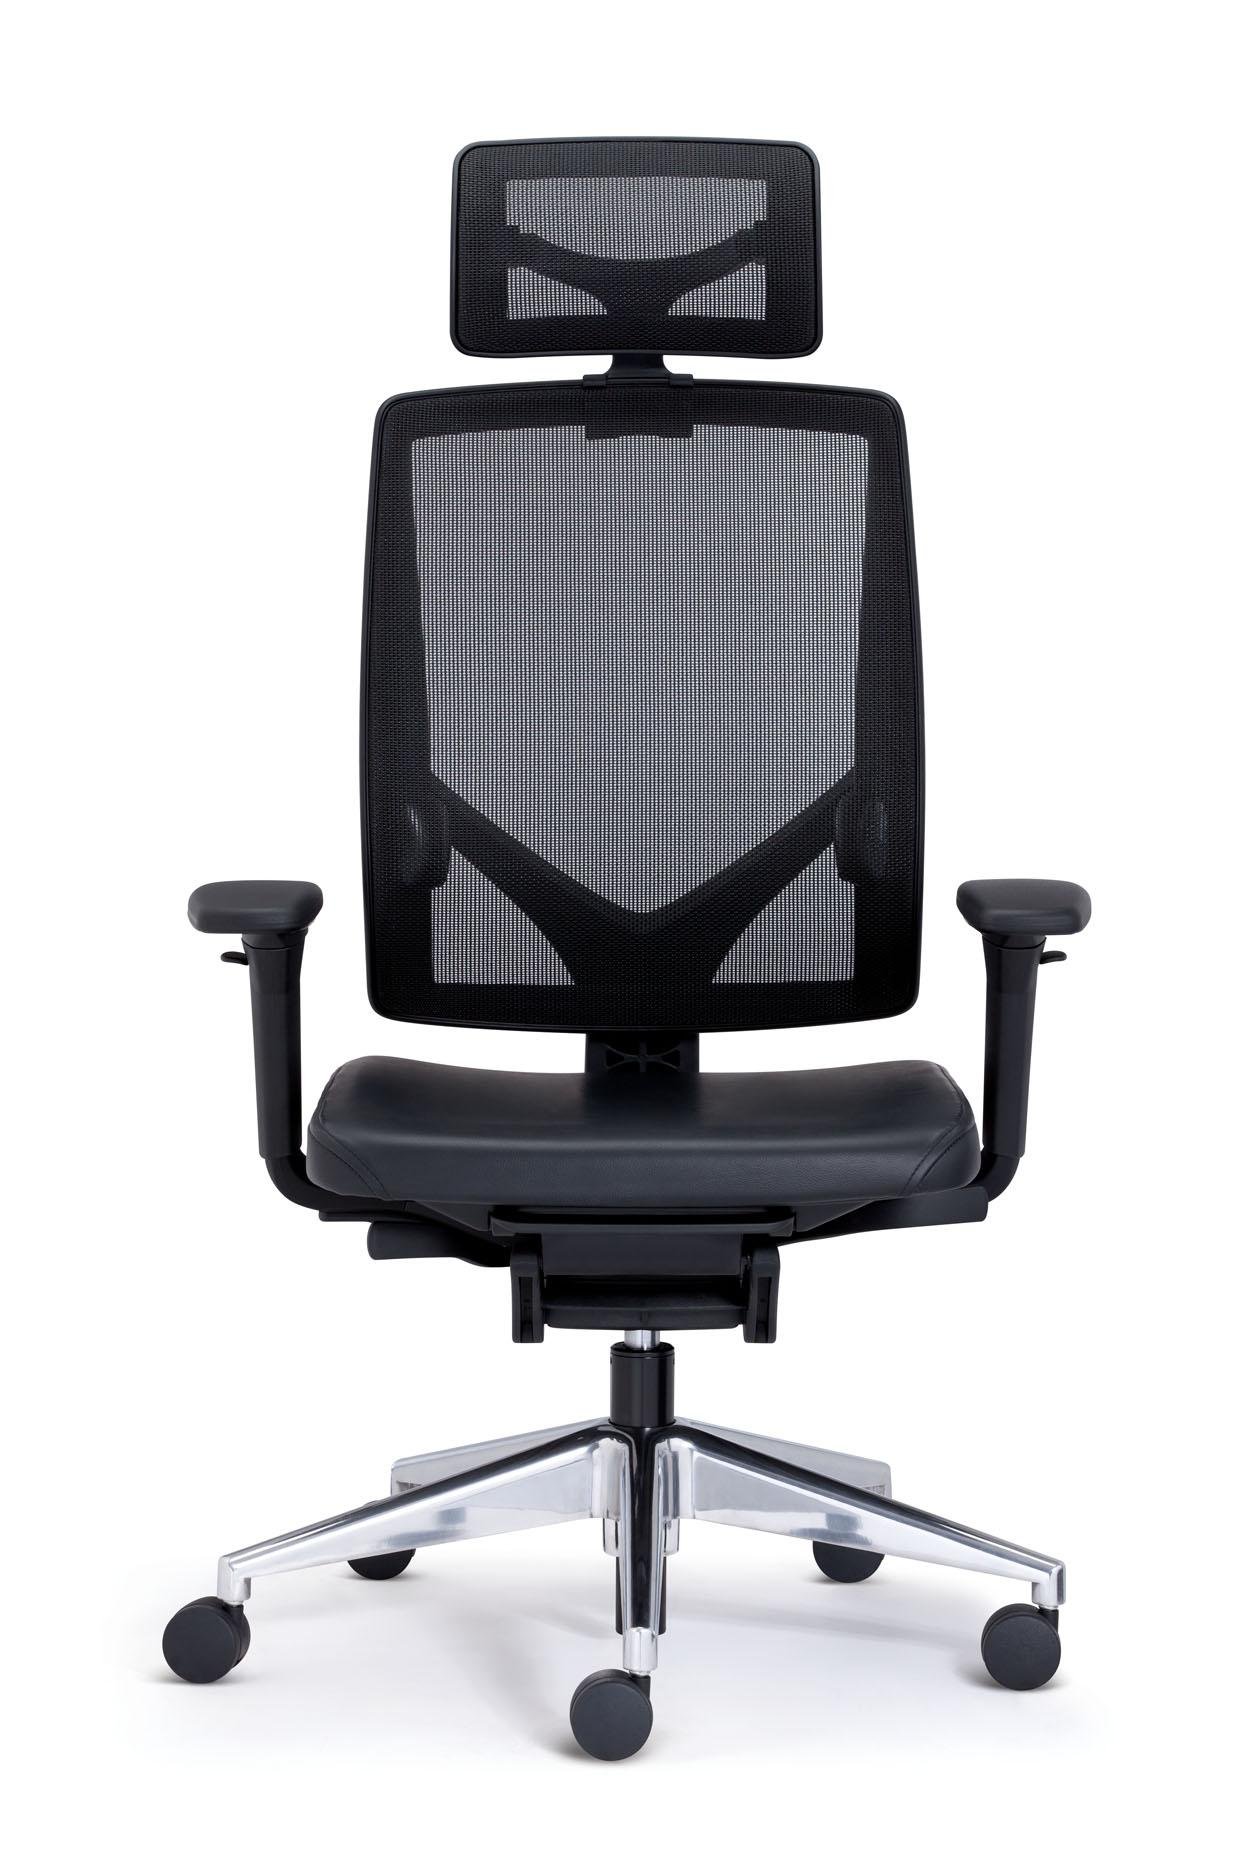 Allsteel Relate office chair MESH CHAIR网椅